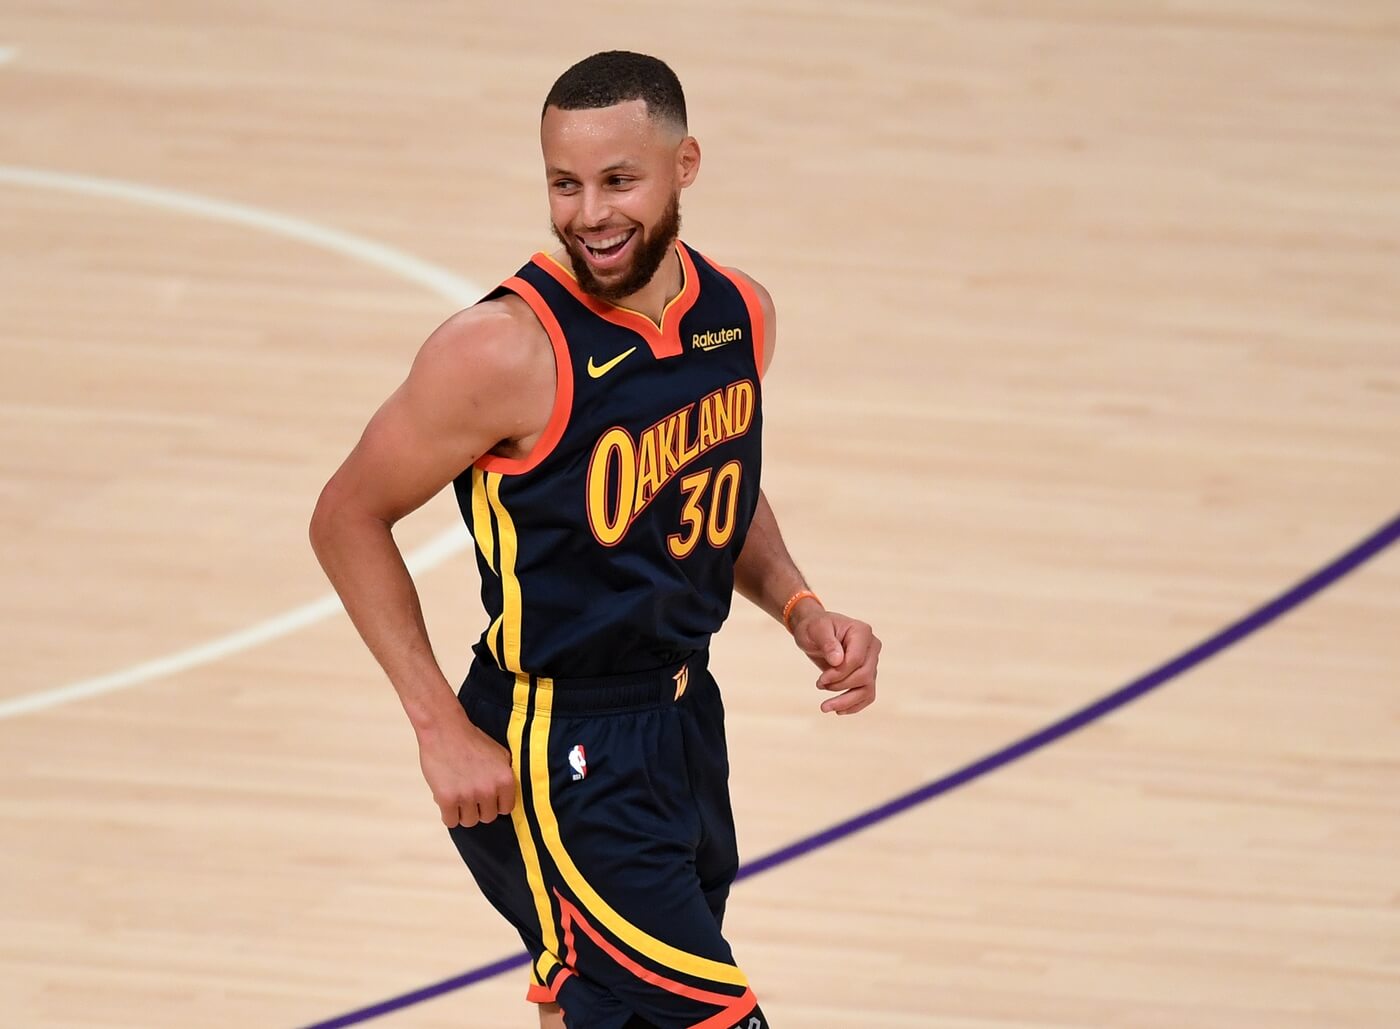 May 19, 2021; Los Angeles, California, USA; Golden State Warriors guard Stephen Curry (30) smiles after shooting a basket over Los Angeles Lakers forward LeBron James (23) in the first half of the game at Staples Center. Mandatory Credit: Jayne Kamin-Oncea-USA TODAY Sports